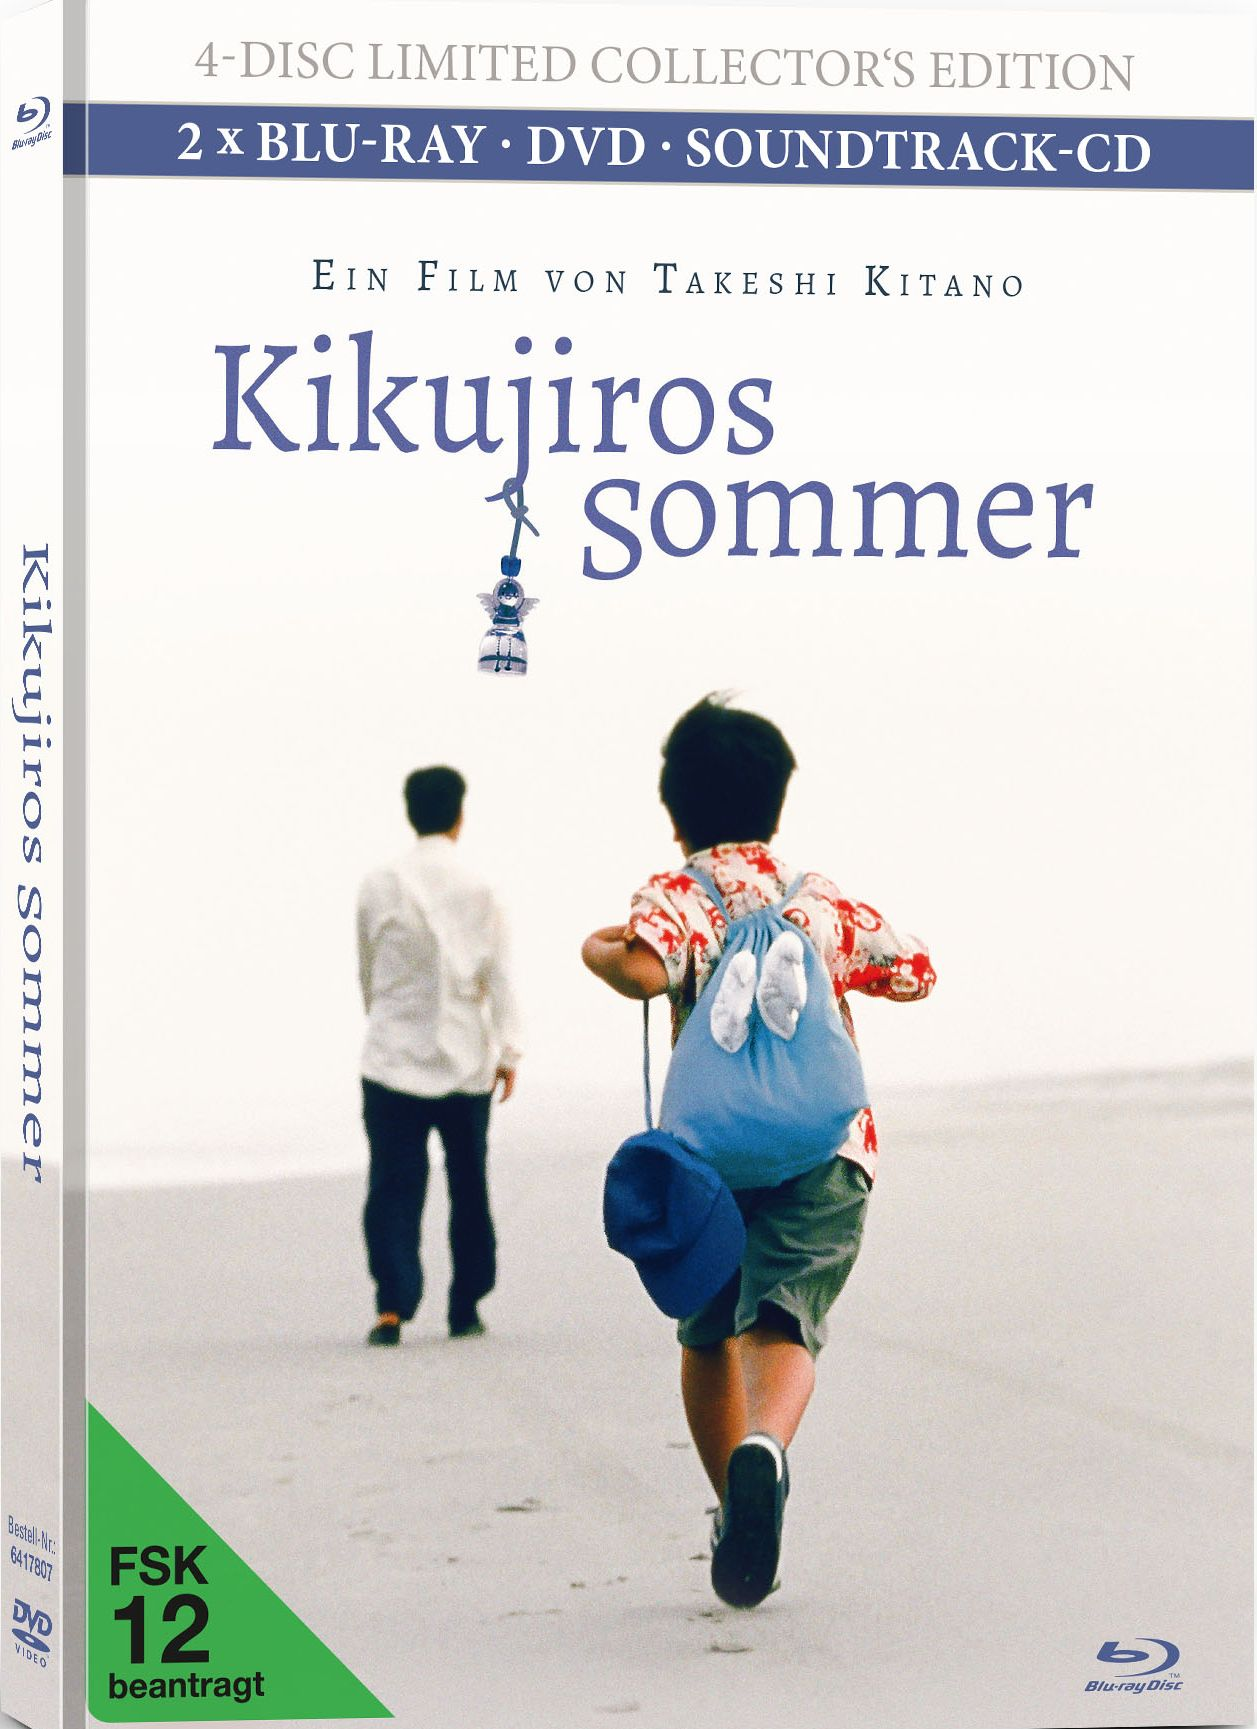 Kikujiros Sommer (4-Disc Limited Collector’s Blu-ray inkl. Soundtrack-CD) + DVD Edition